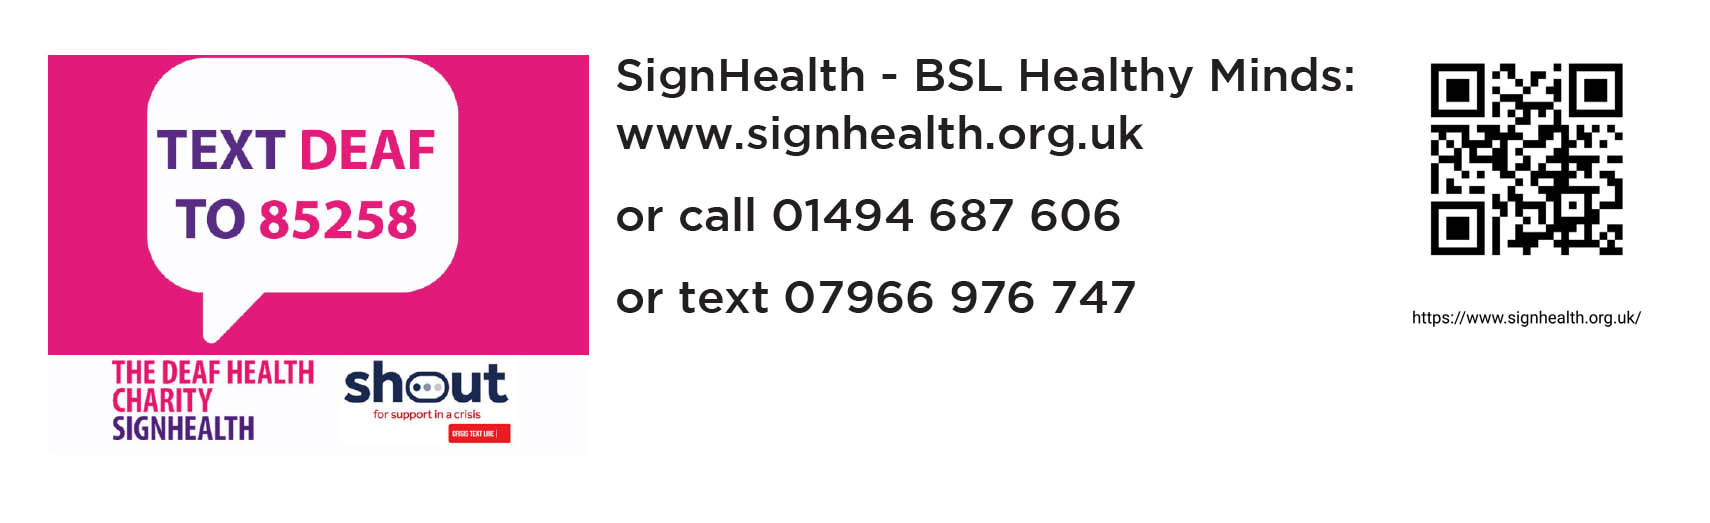 Banner link to the Charity Sign Health for deaf people in the UK